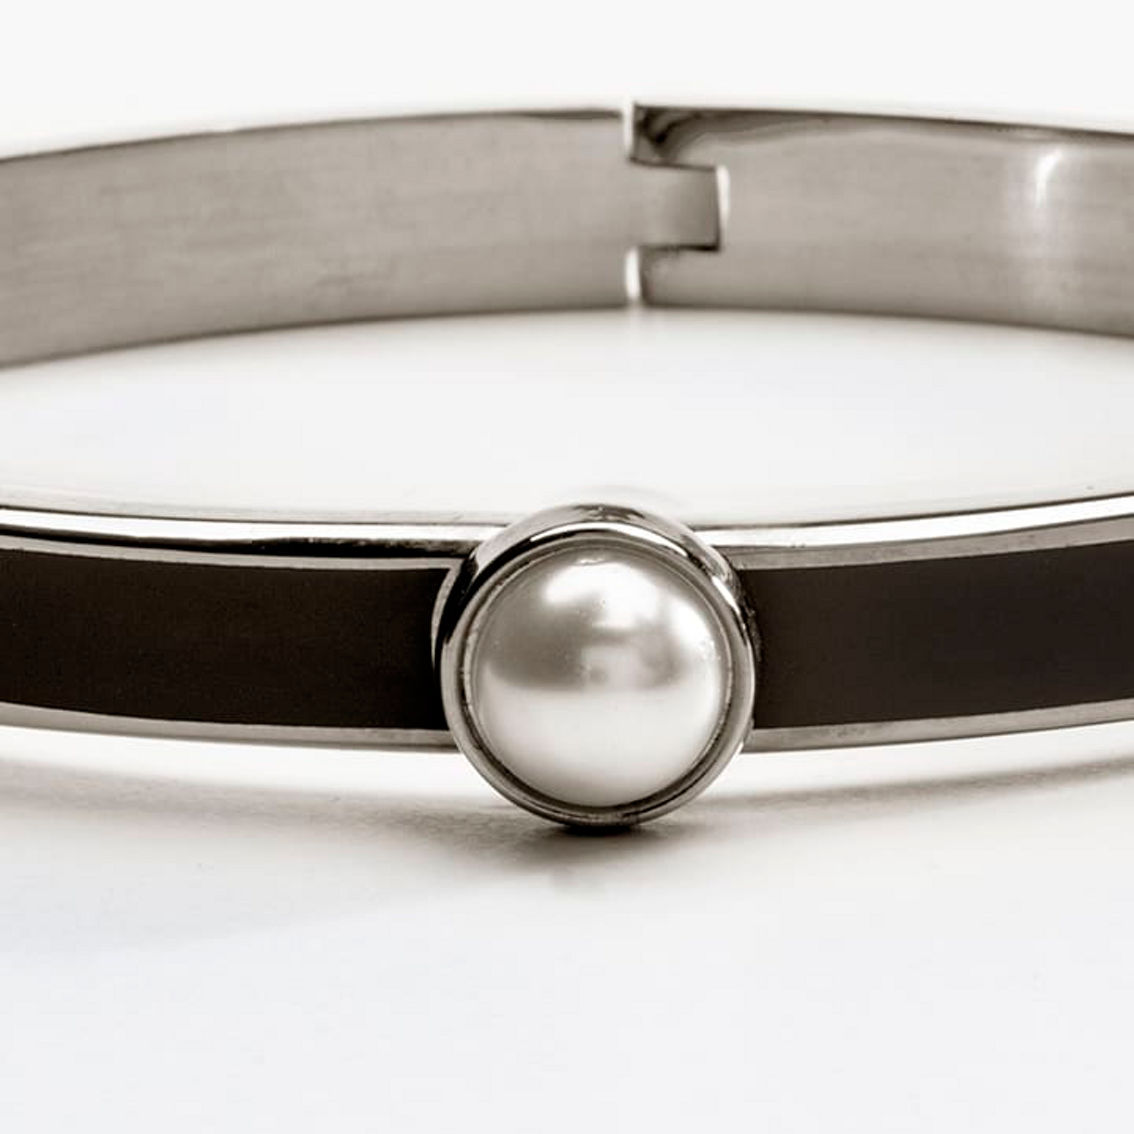 Halcyon Days 6mm - Skinny Cabochon Pearl Hinged Bangle - Image 2 of 2